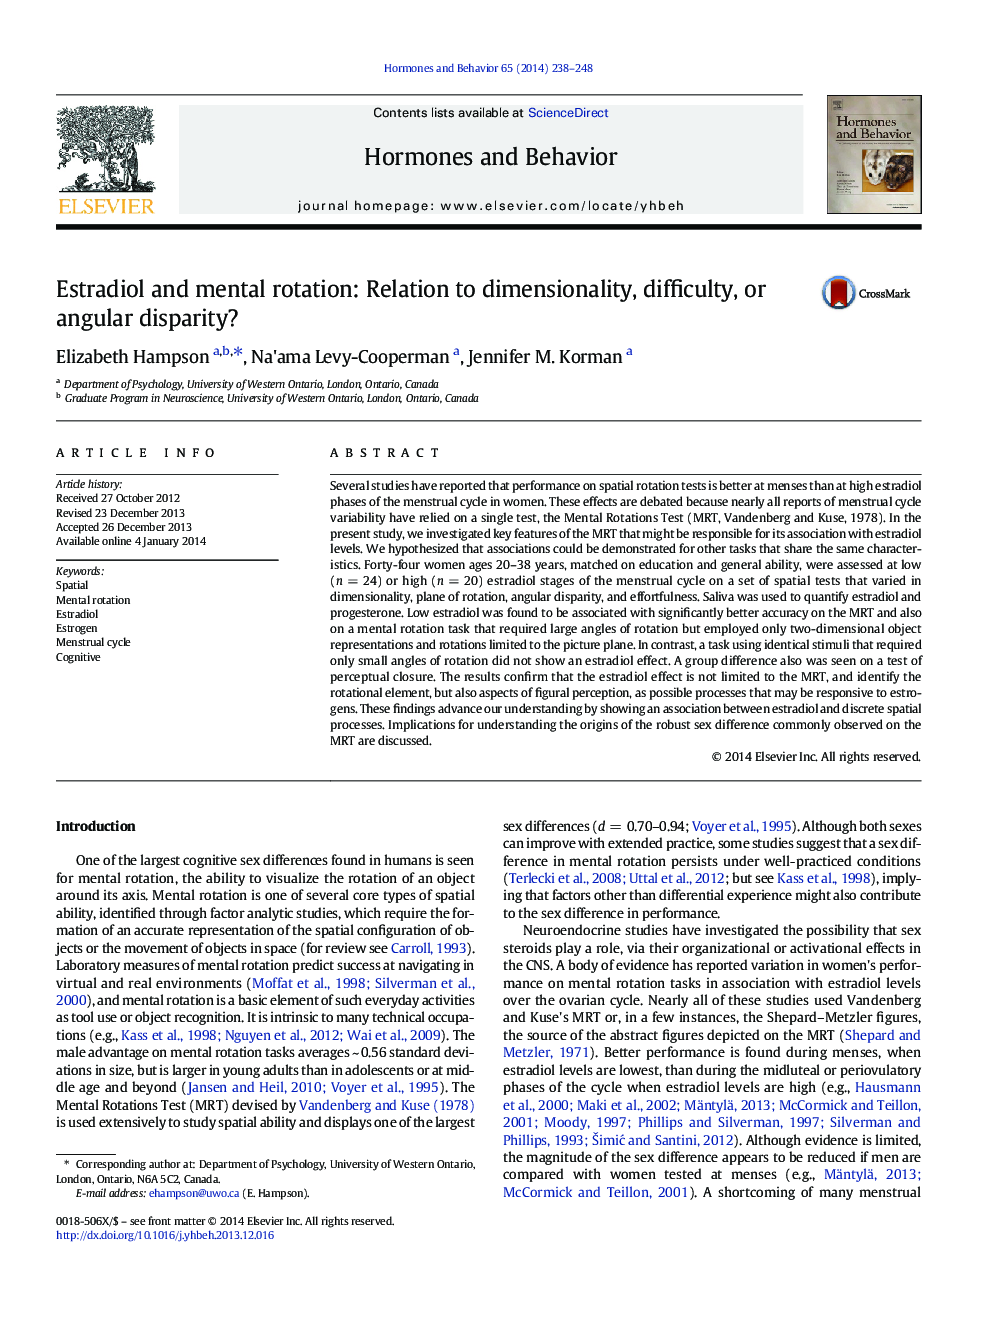 Estradiol and mental rotation: Relation to dimensionality, difficulty, or angular disparity?